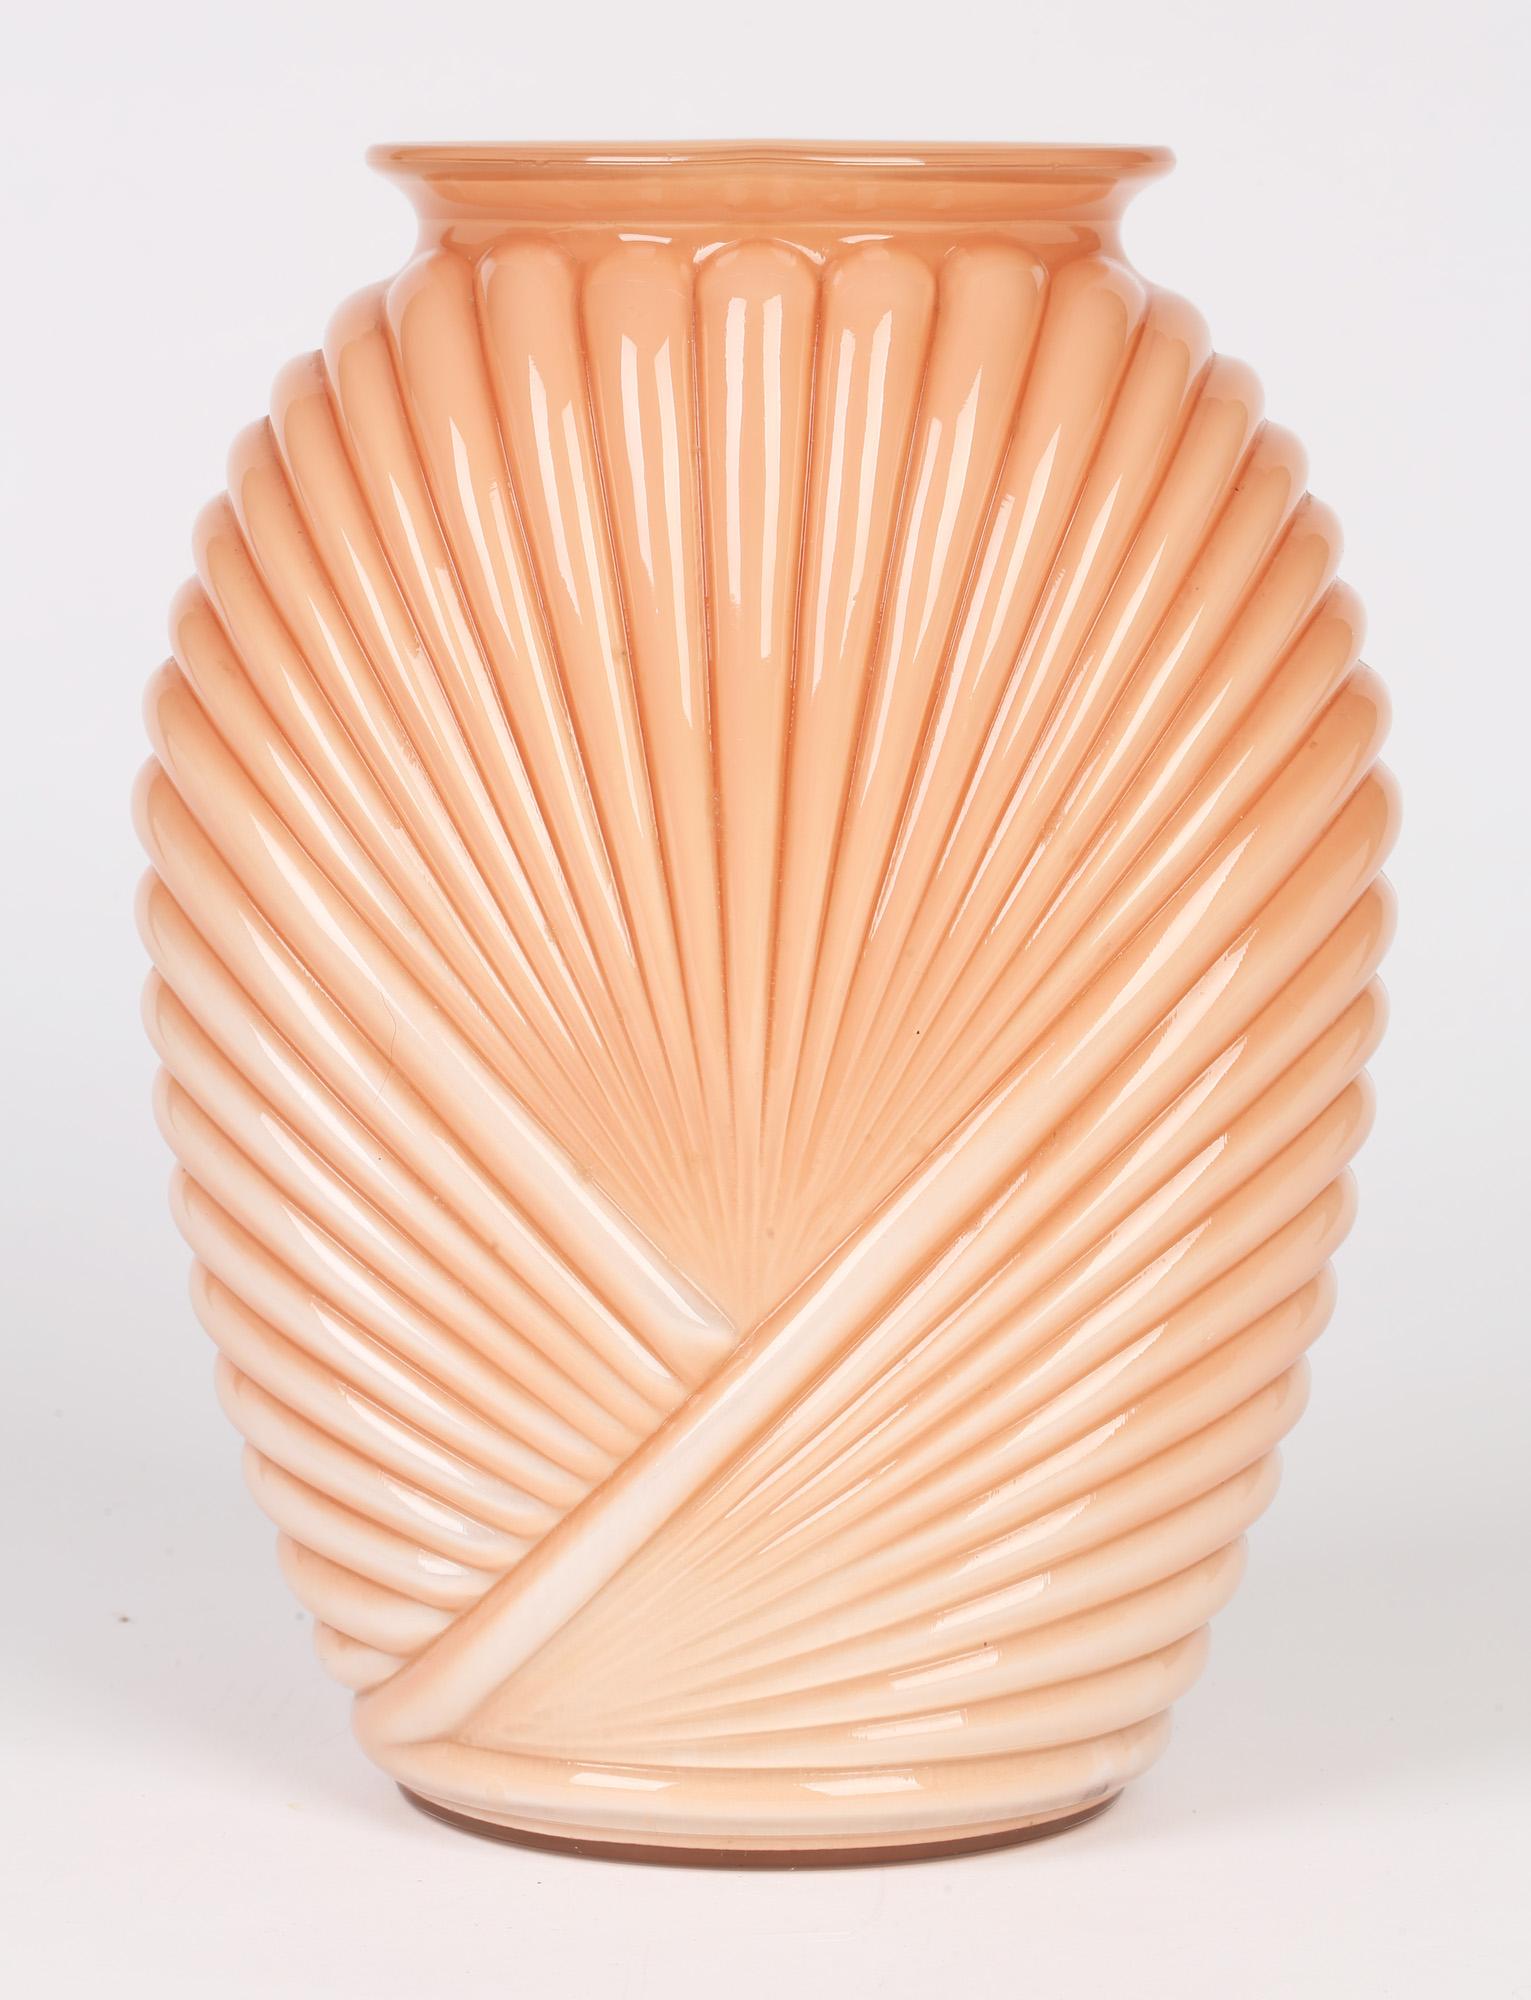 Anchor Hocking Art Deco Style Salmon Pink Molded Fan Pattern Glass Vase For Sale 4